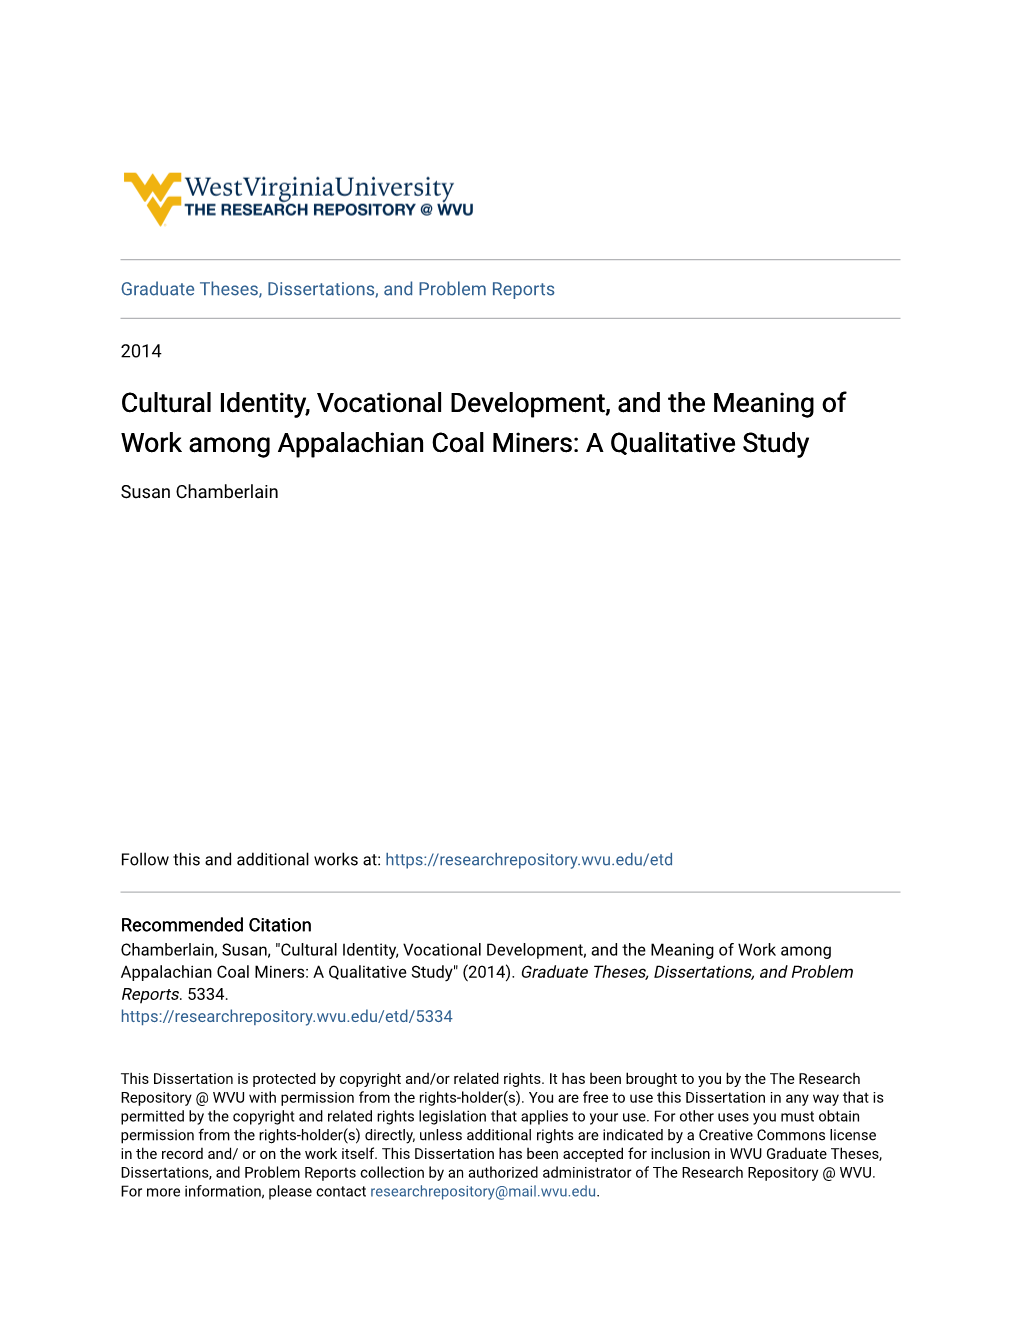 Cultural Identity, Vocational Development, and the Meaning of Work Among Appalachian Coal Miners: a Qualitative Study